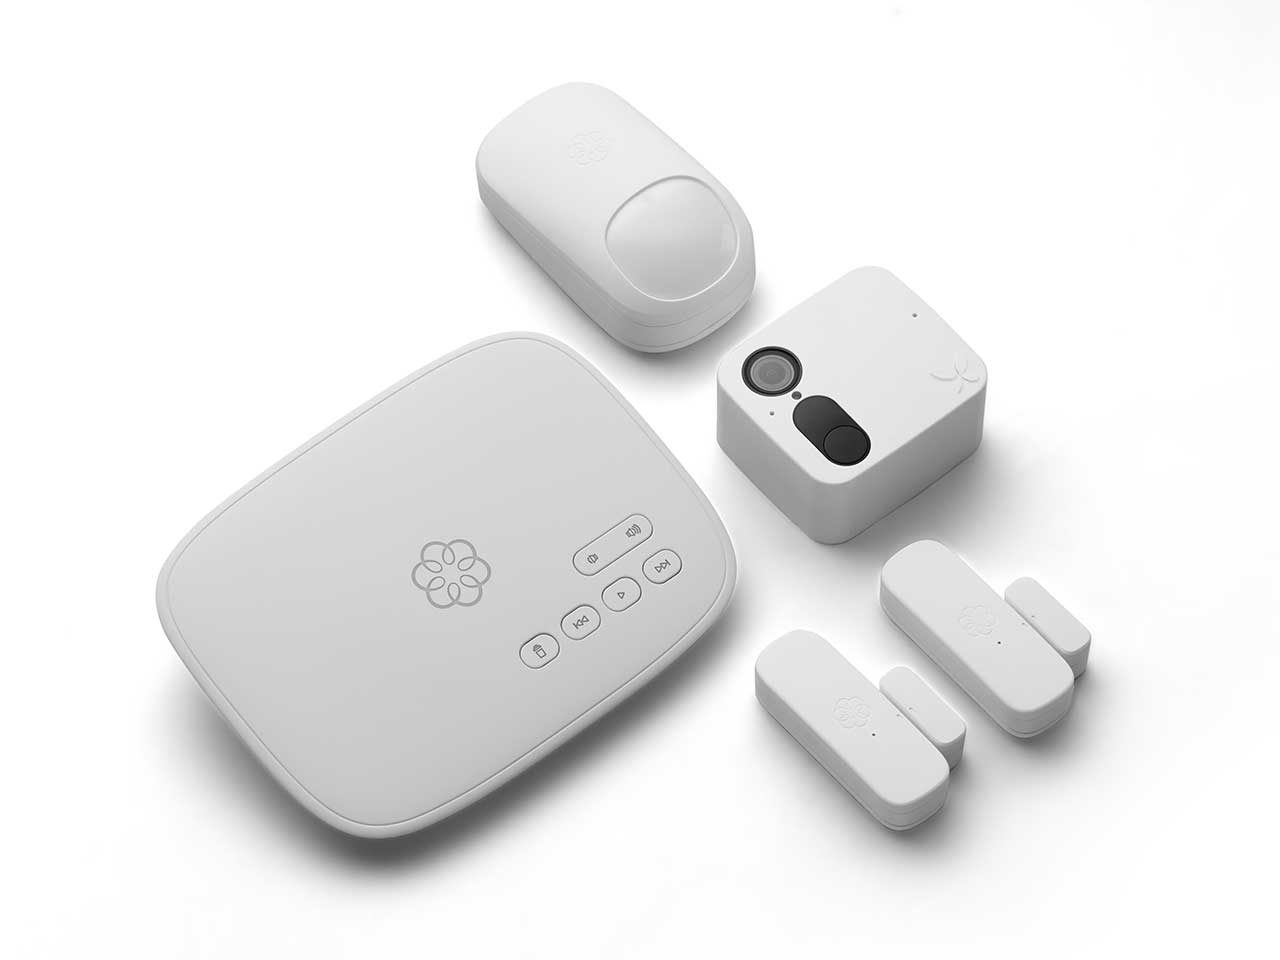 ooma cam